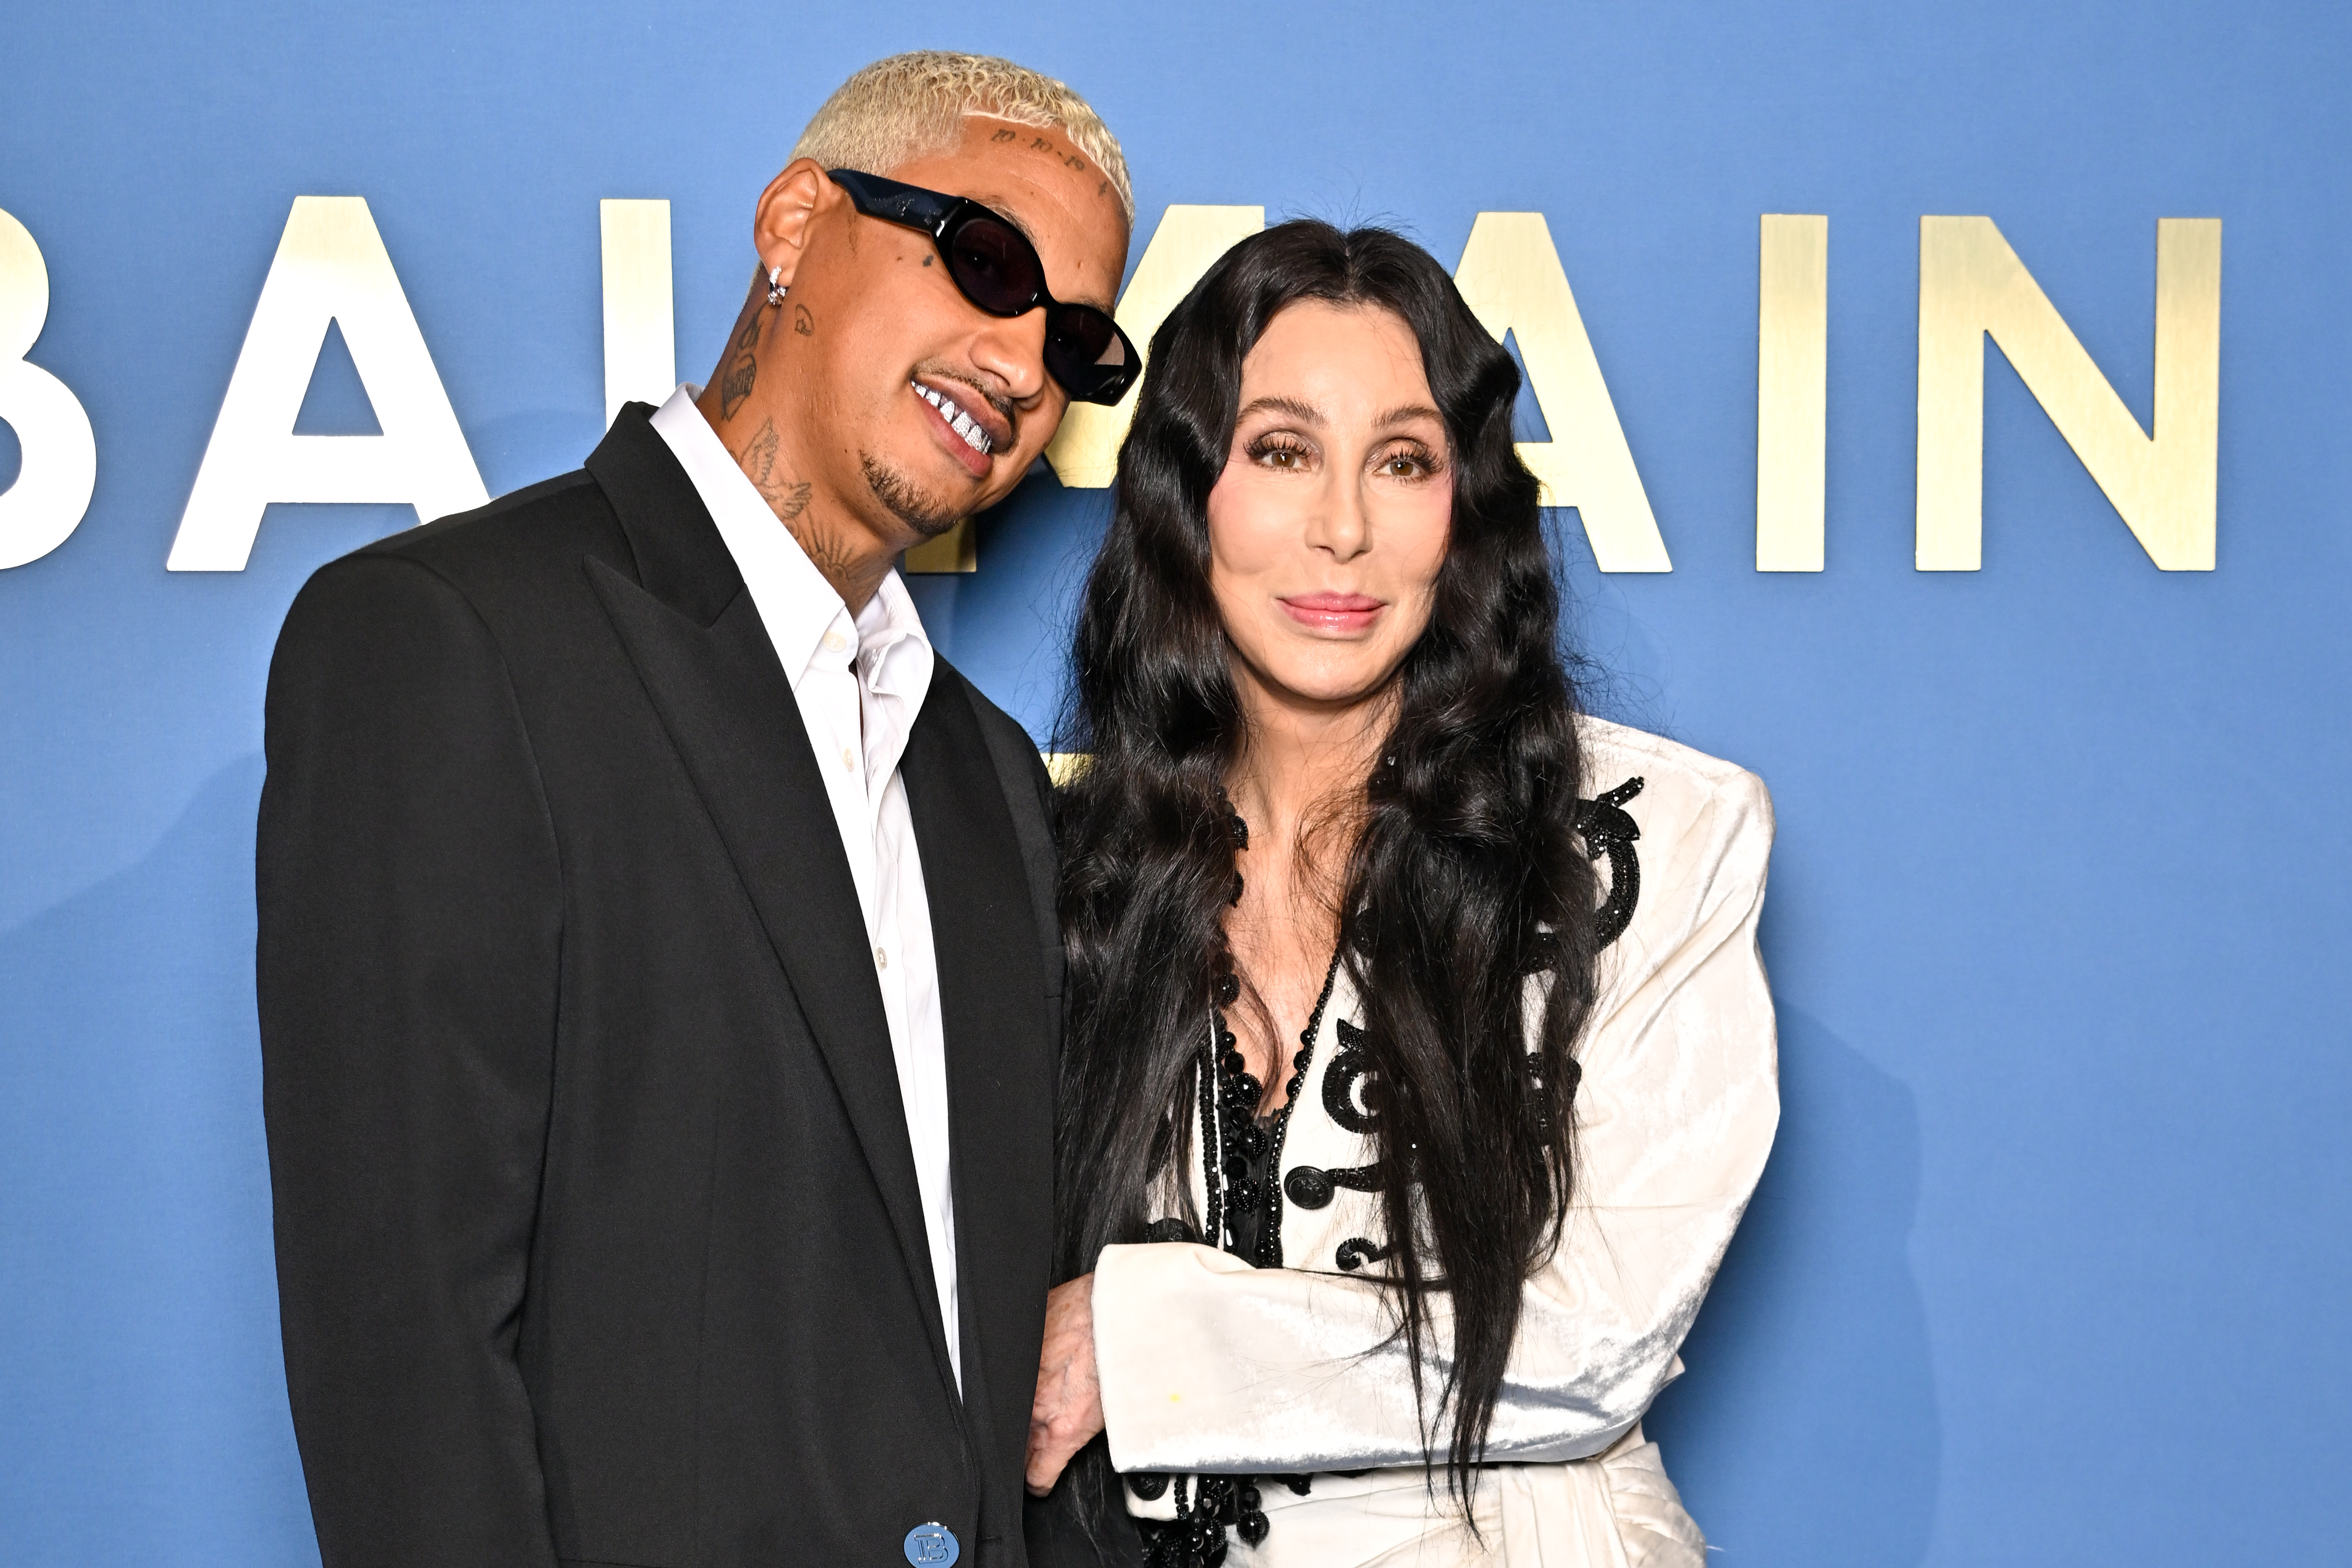 Alexander Edwards and Cher at the Balmain Womenswear Spring/Summer 2024 show in Paris, France on September 27, 2023 | Source: Getty Images